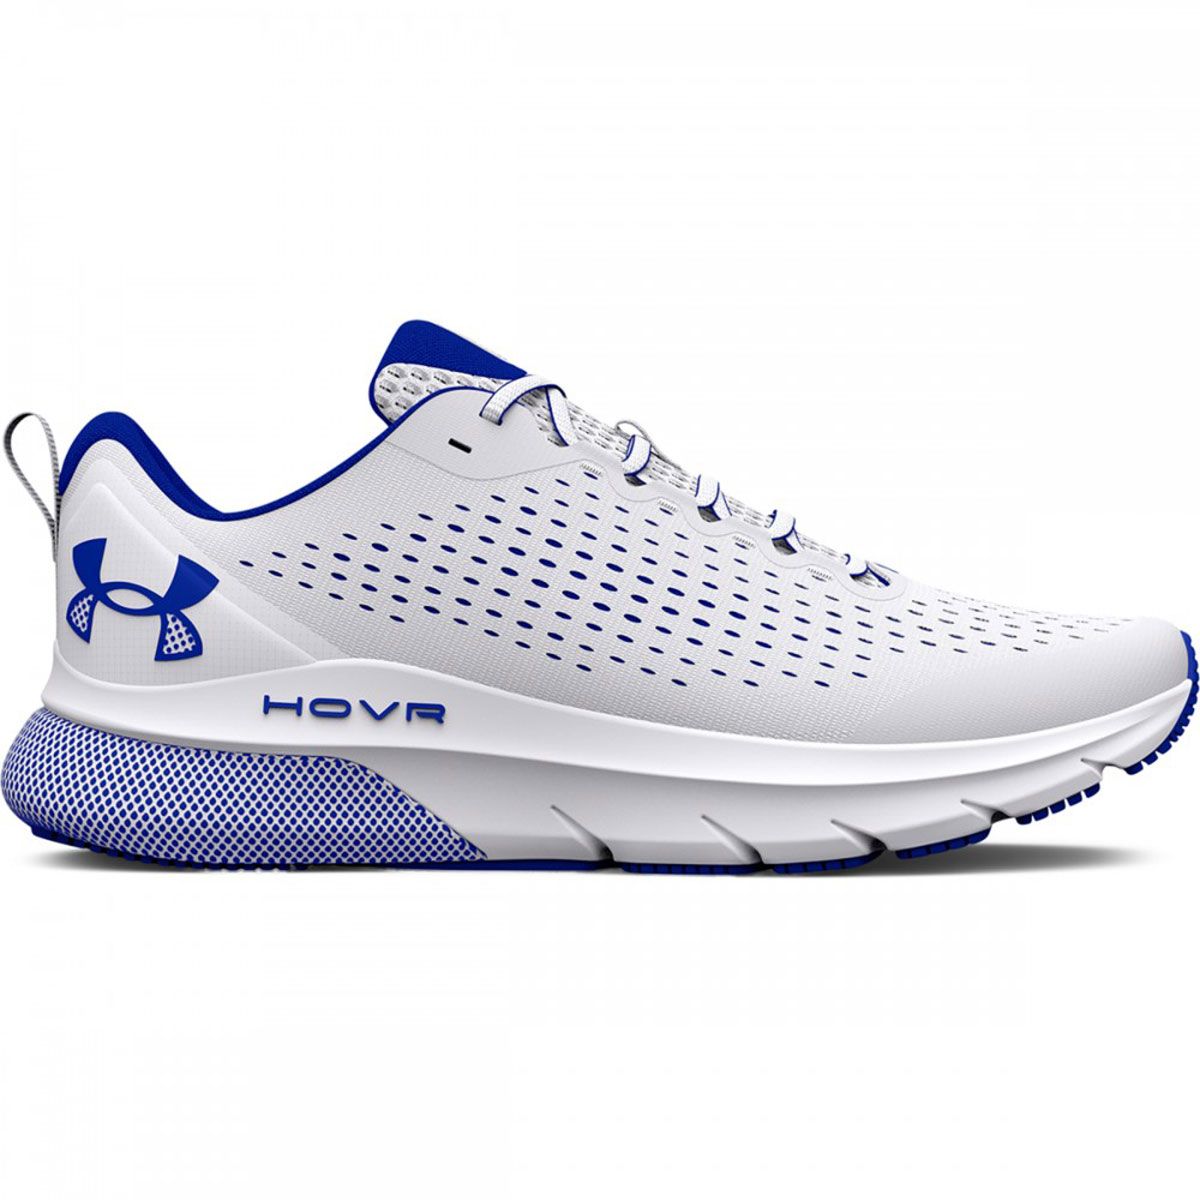 Under Armour Hovr Turbulence Men's Running Shoes 3025419-100